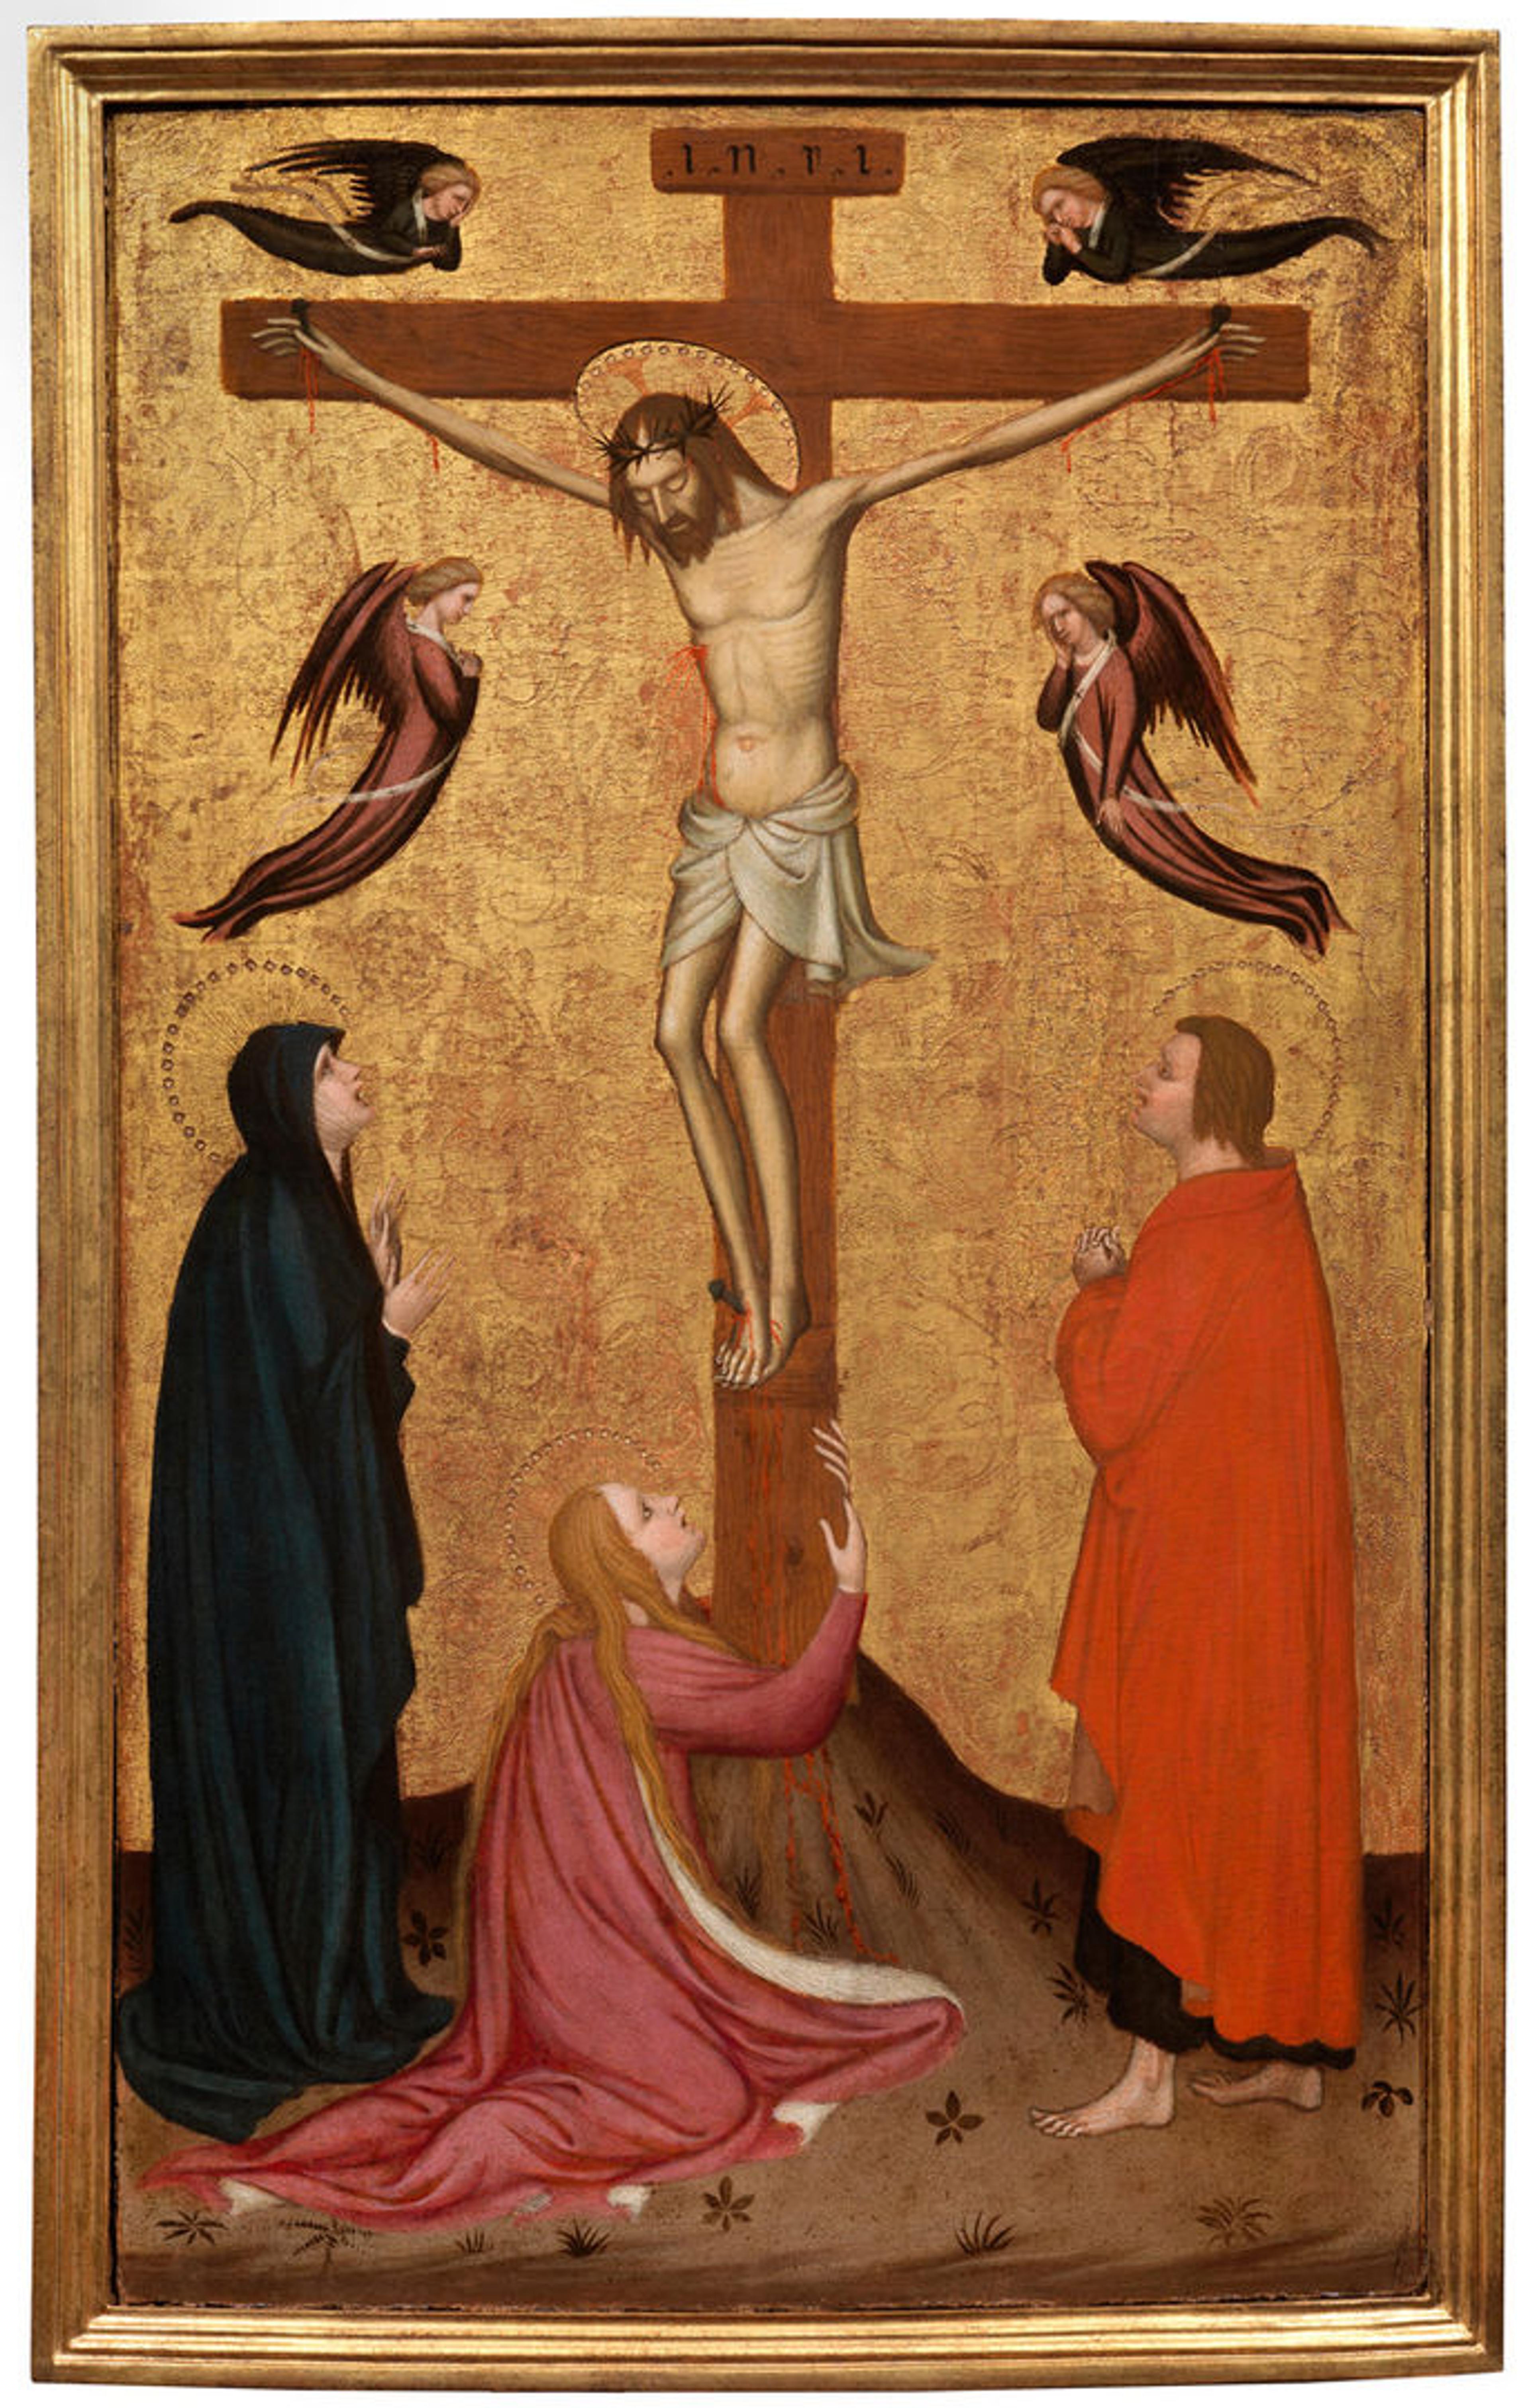 A crucifixion scene by Stefano da Verona, showing Jesus on a cross surrounded by four robed angels, while the Virgin Mary, Saint John, and Mary Magdalene weep at the base of the cross